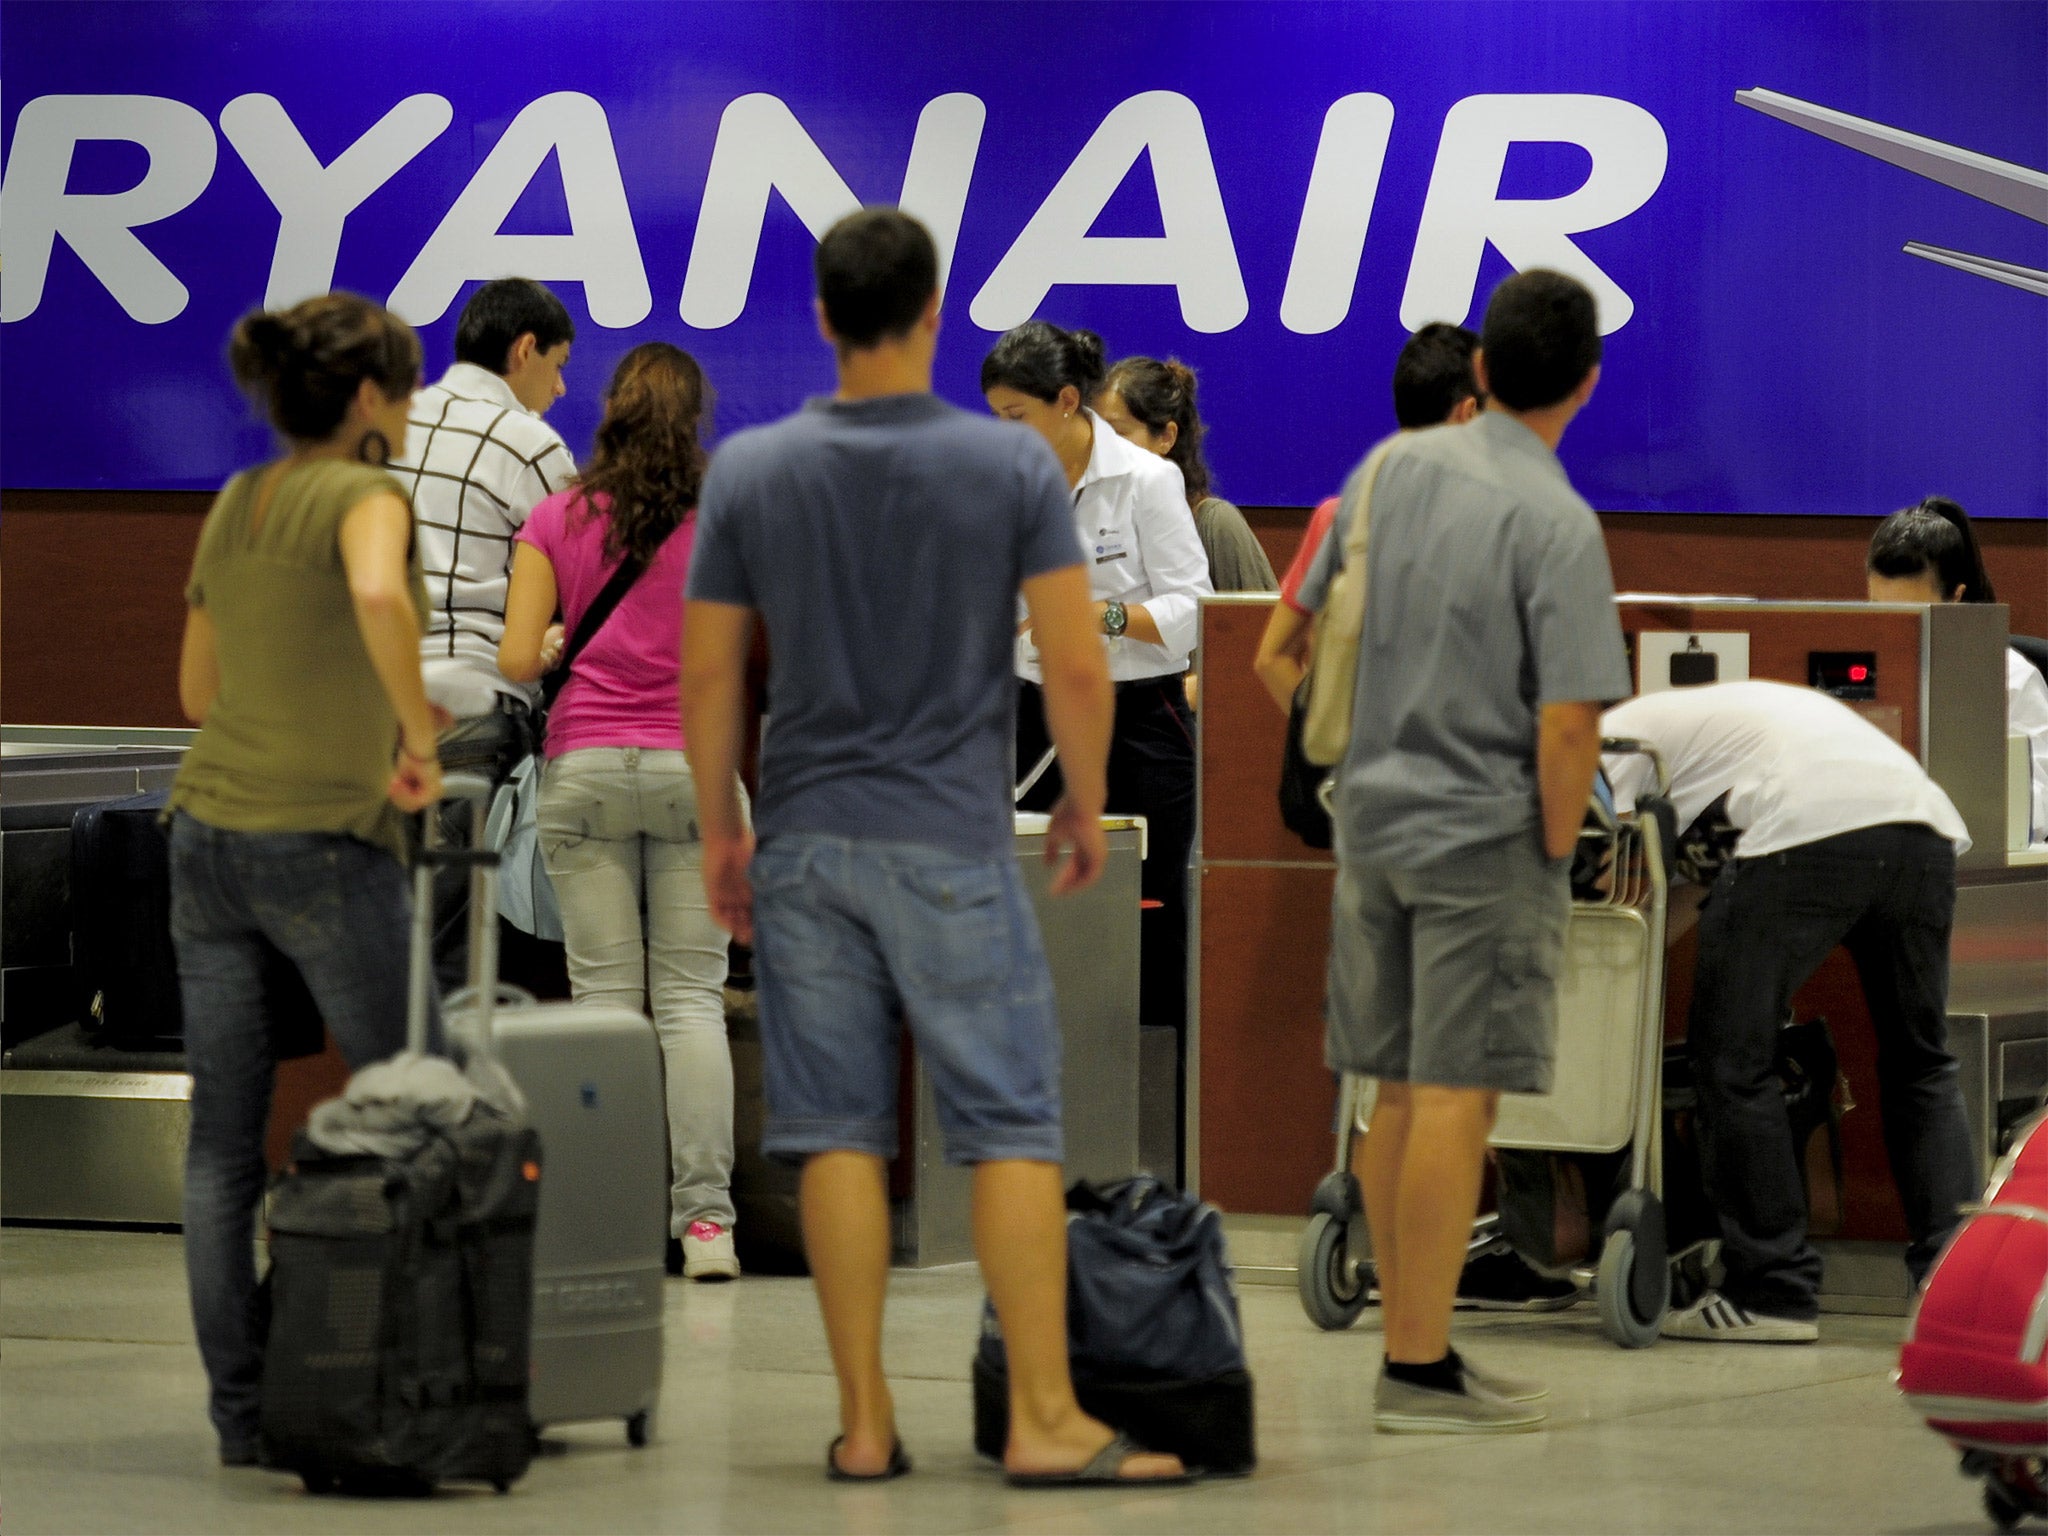 Ryanair has adopted a more generous, less draconian approach to its customer service